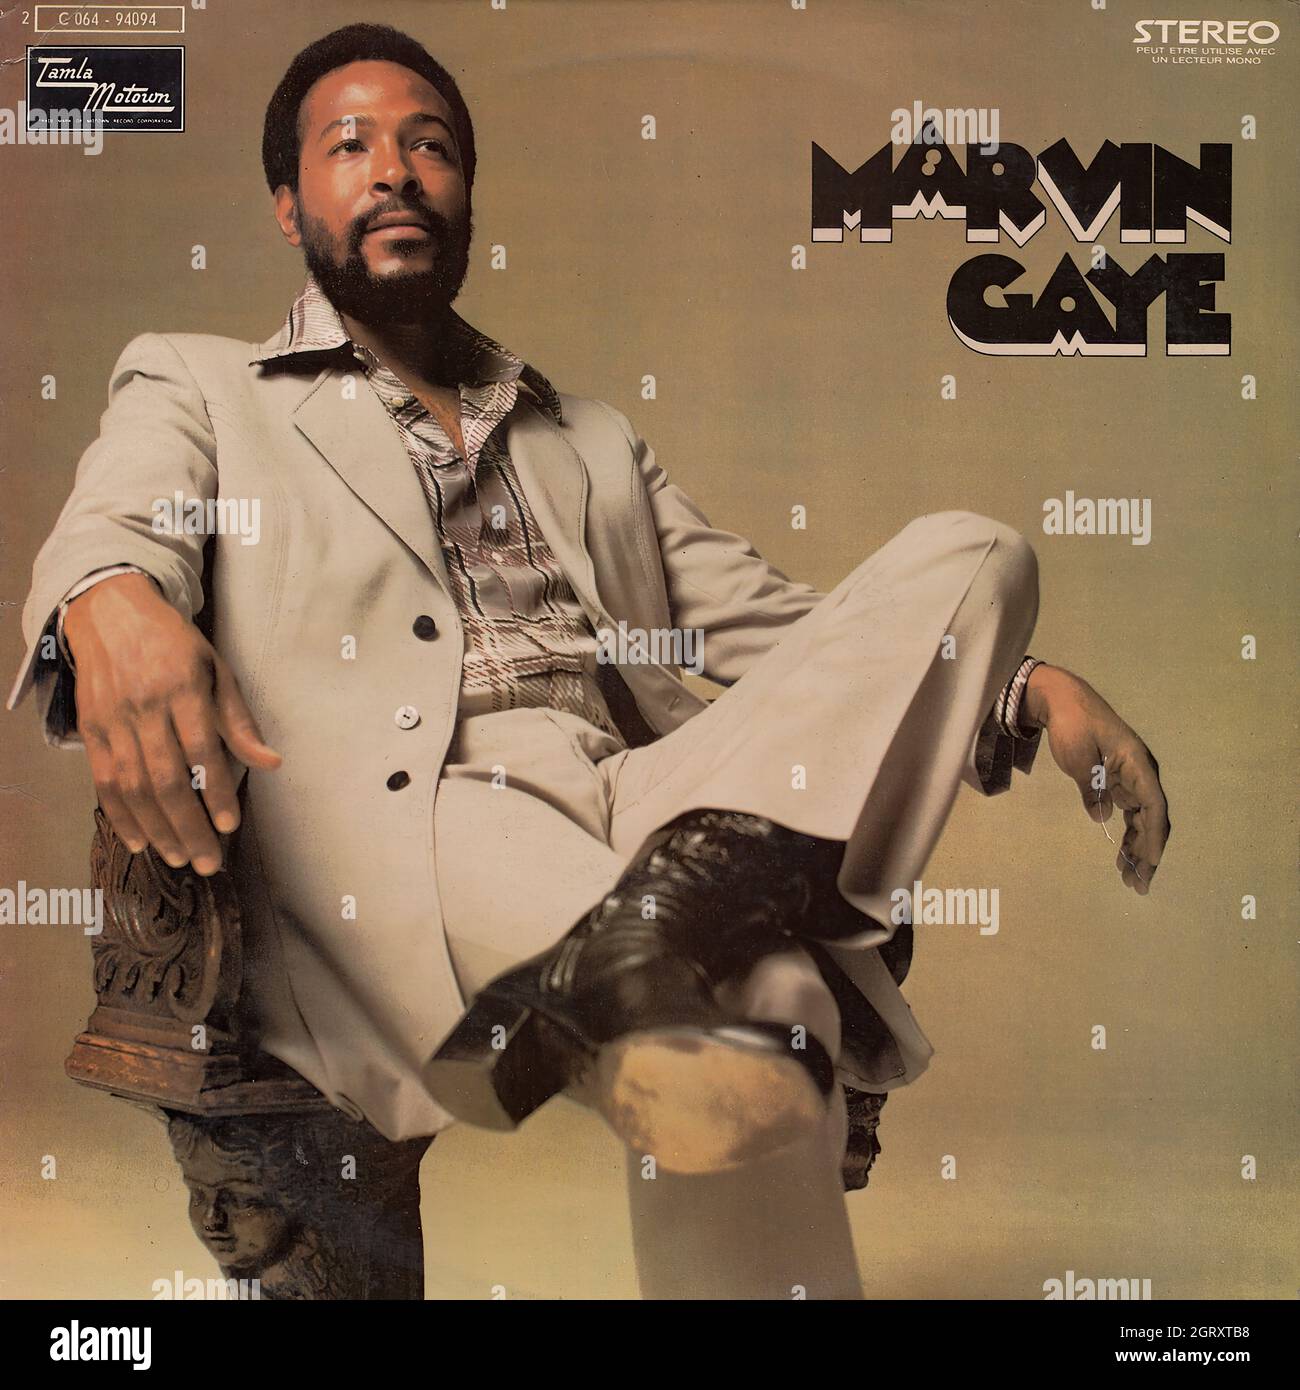 Marvin Gaye - Trouble man o.s.t - Vintage Vinyl Record Cover Stock Photo